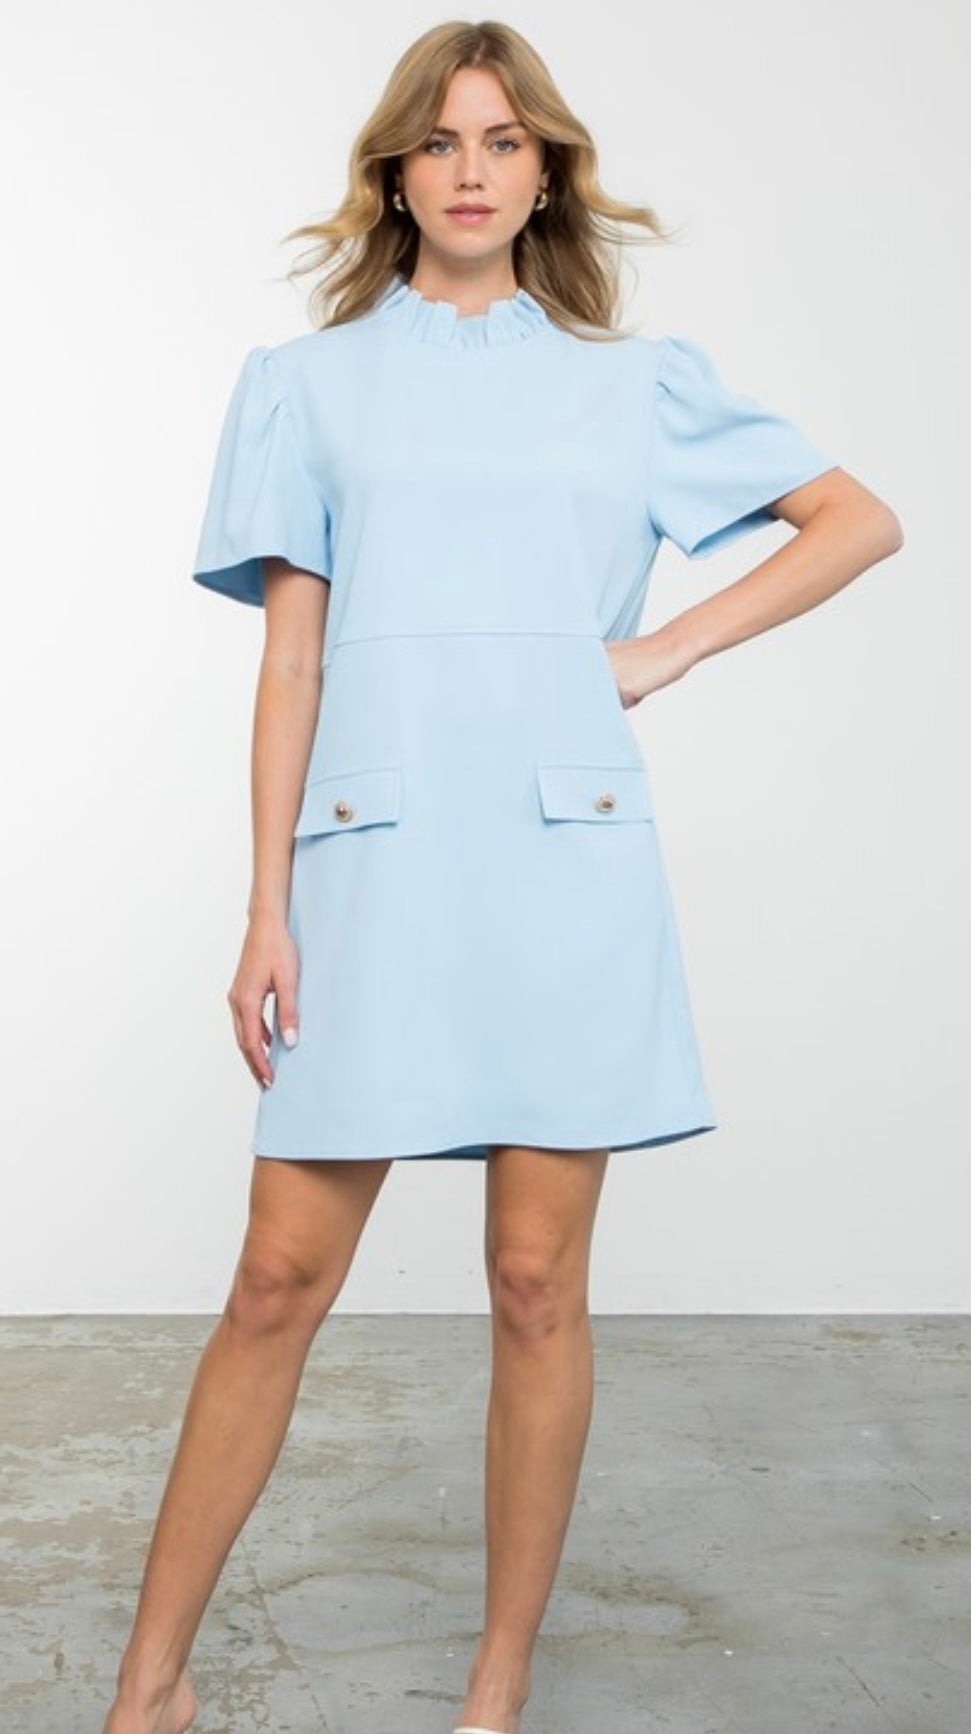 Baby Blue Short Sleeve Dress with Gold Button Pocket Detail